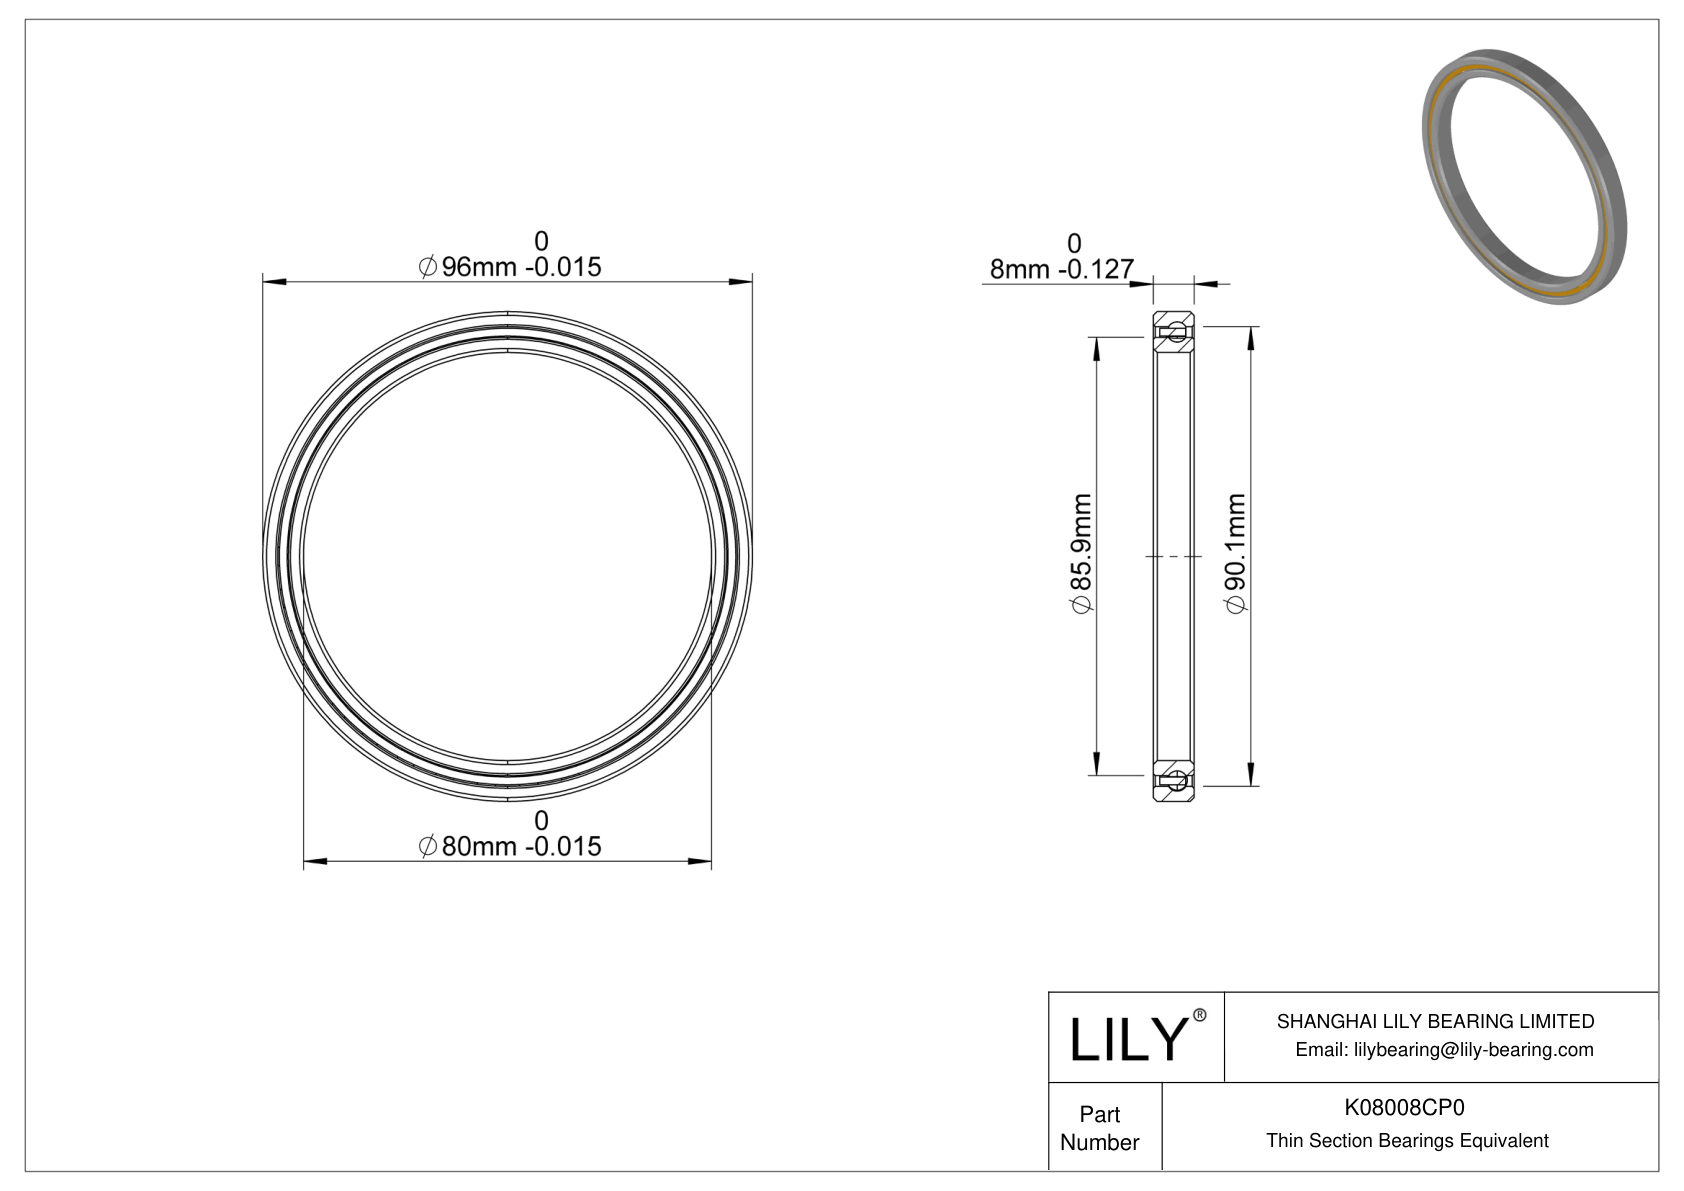 K08008CP0 Constant Section (CS) Bearings cad drawing